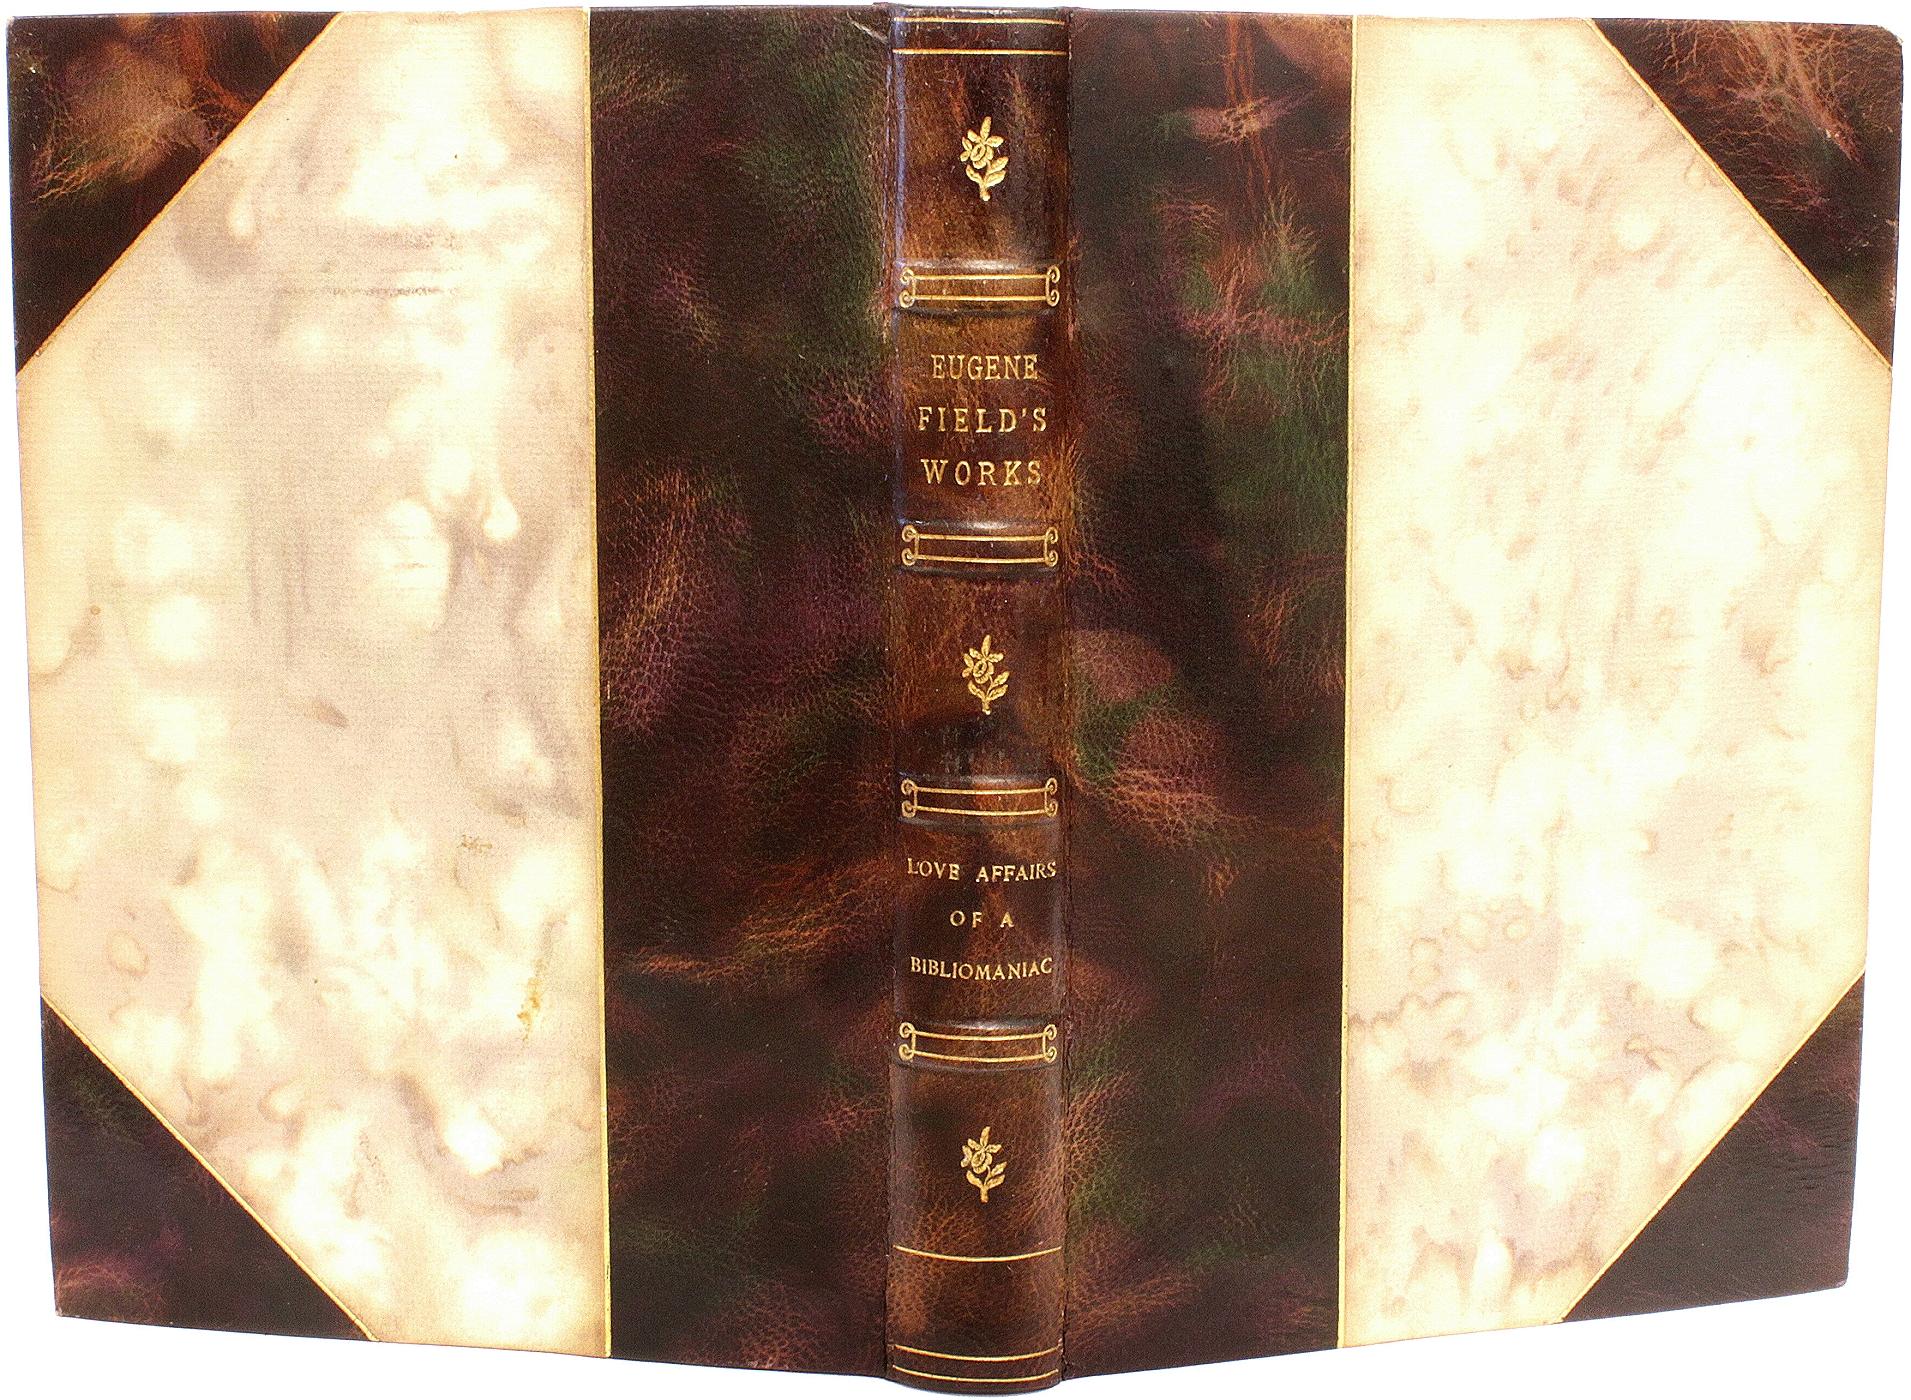 Late 19th Century Works, Writings in Prose & Verse, of Eugene Field - 12 vols. - IN A FINE BINDING For Sale